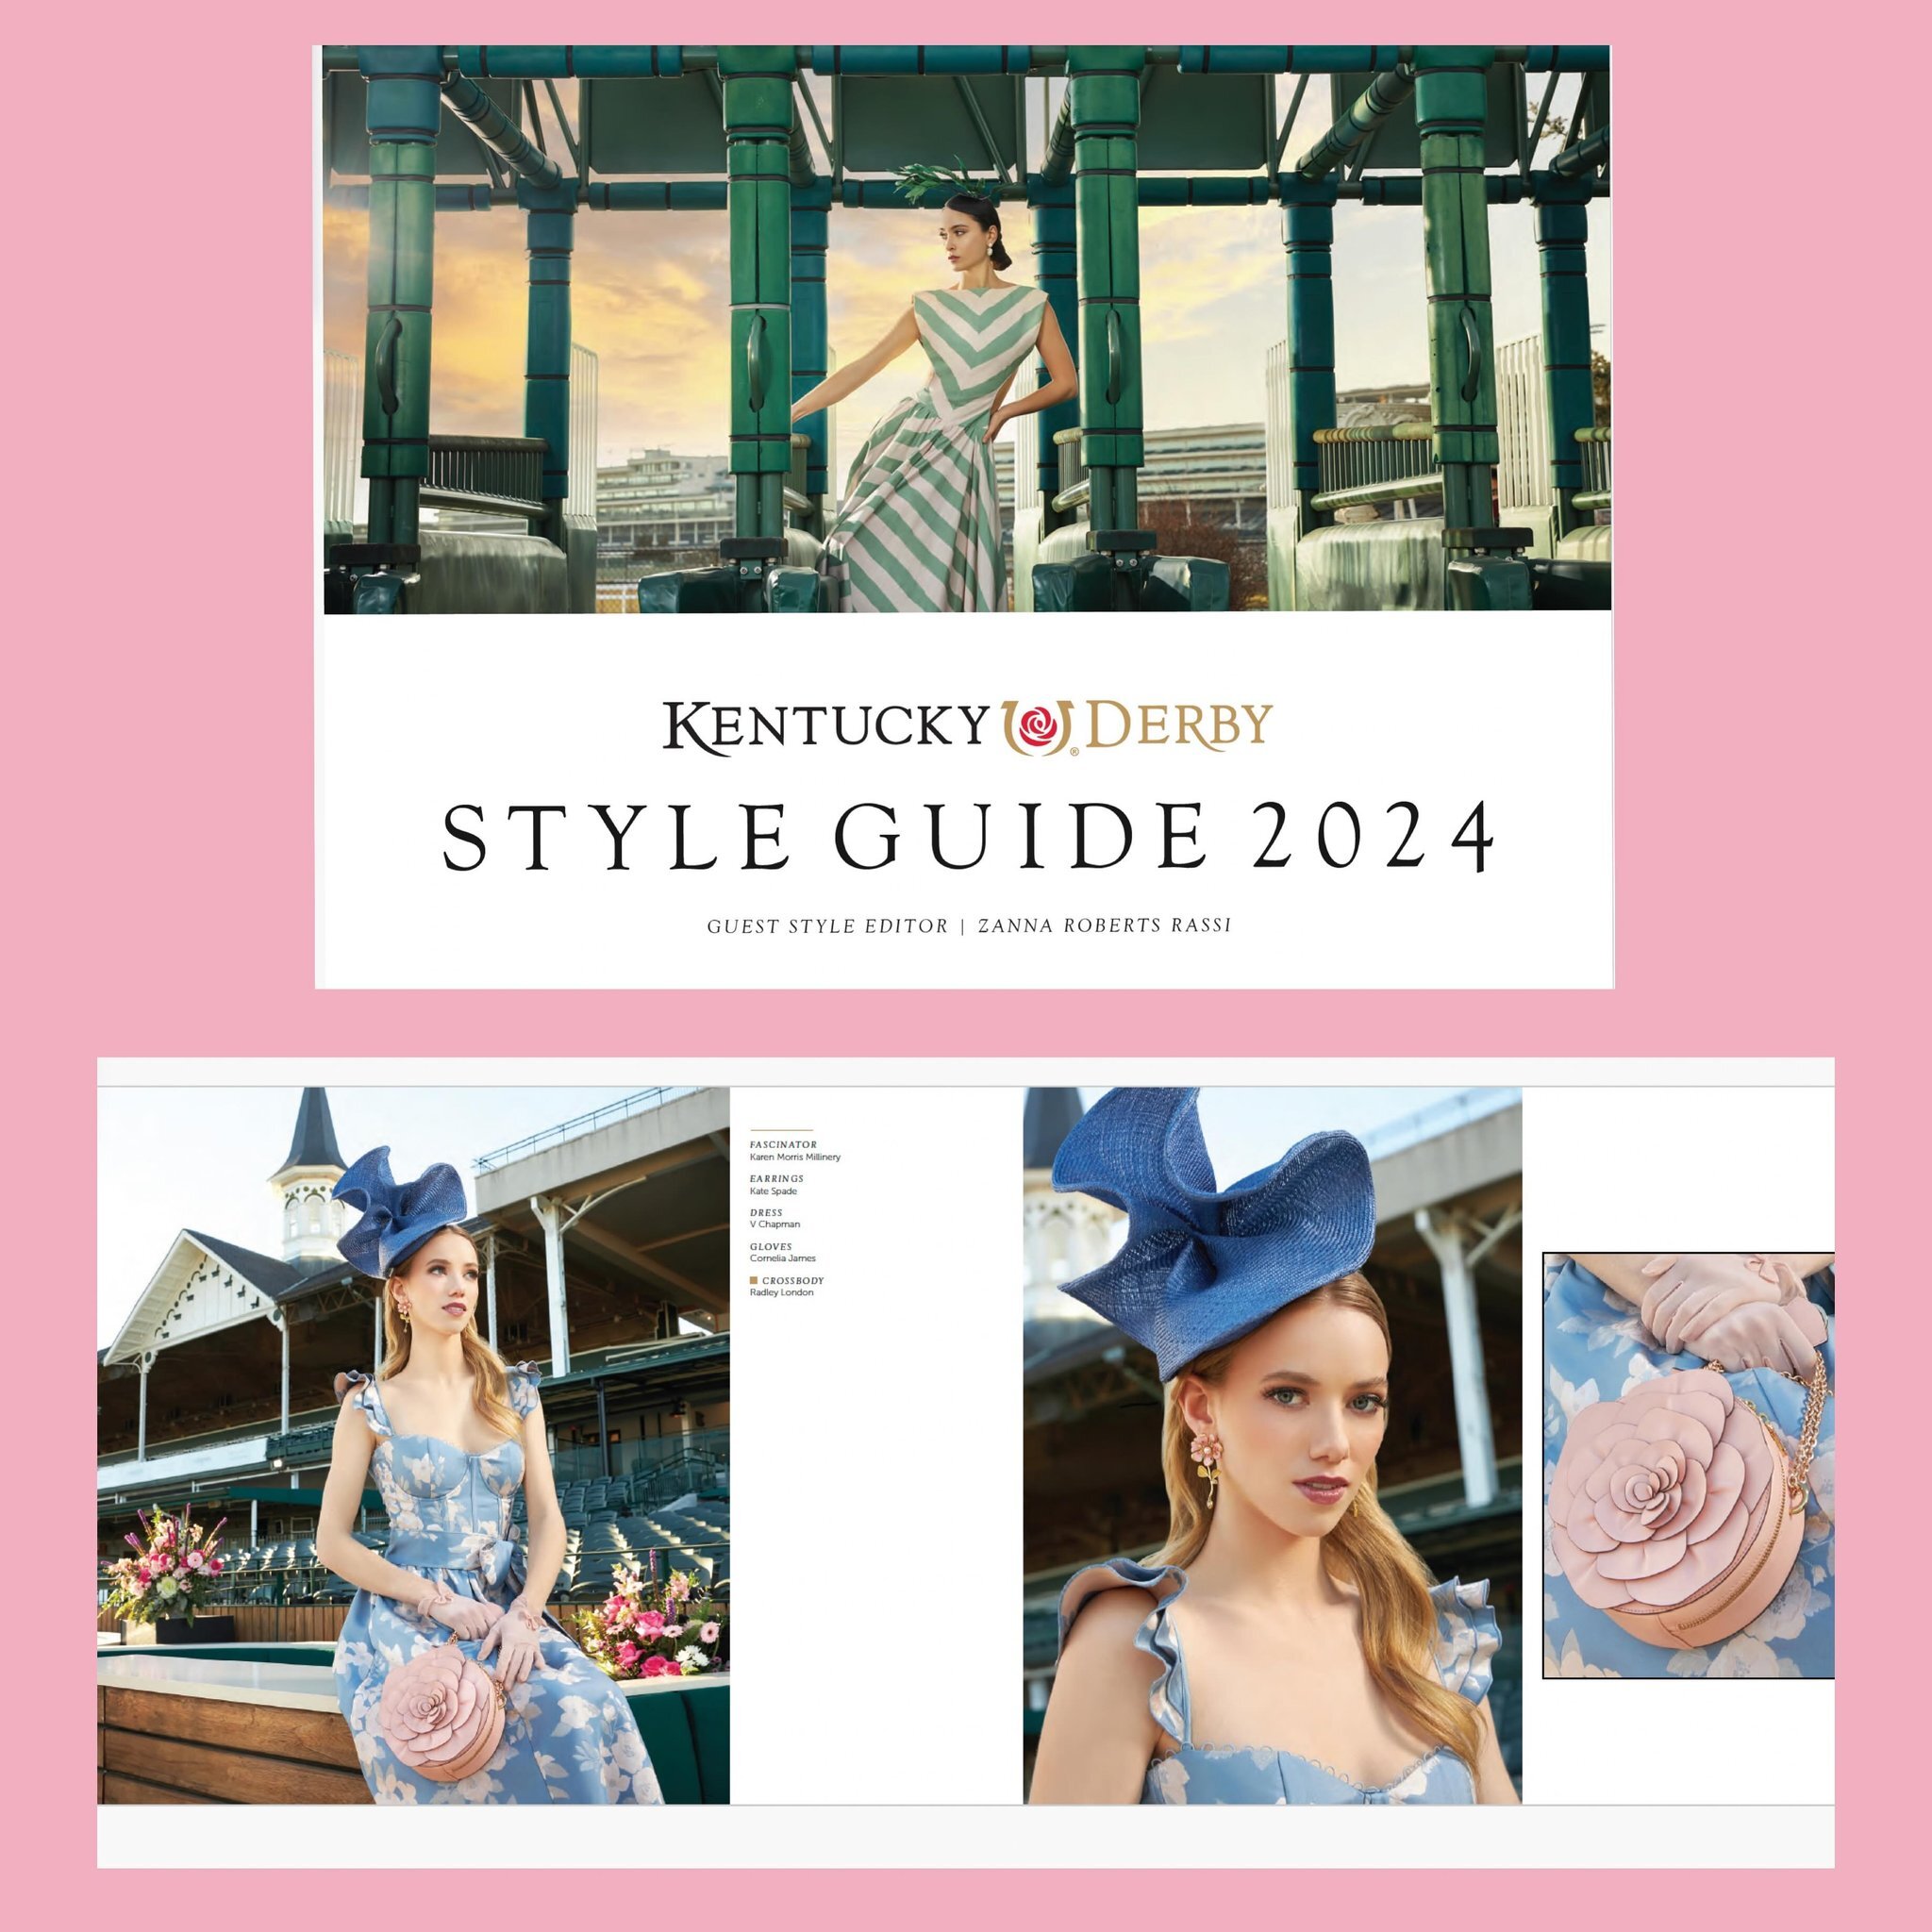 I&rsquo;m so happy to tell you an exciting news.  My hat is in @kentuckyderby official style guide.  It&rsquo;s a huge honor for my career. Thank you so very much for everyone supporting me, especially the people provide me opportunities.  Thank you 